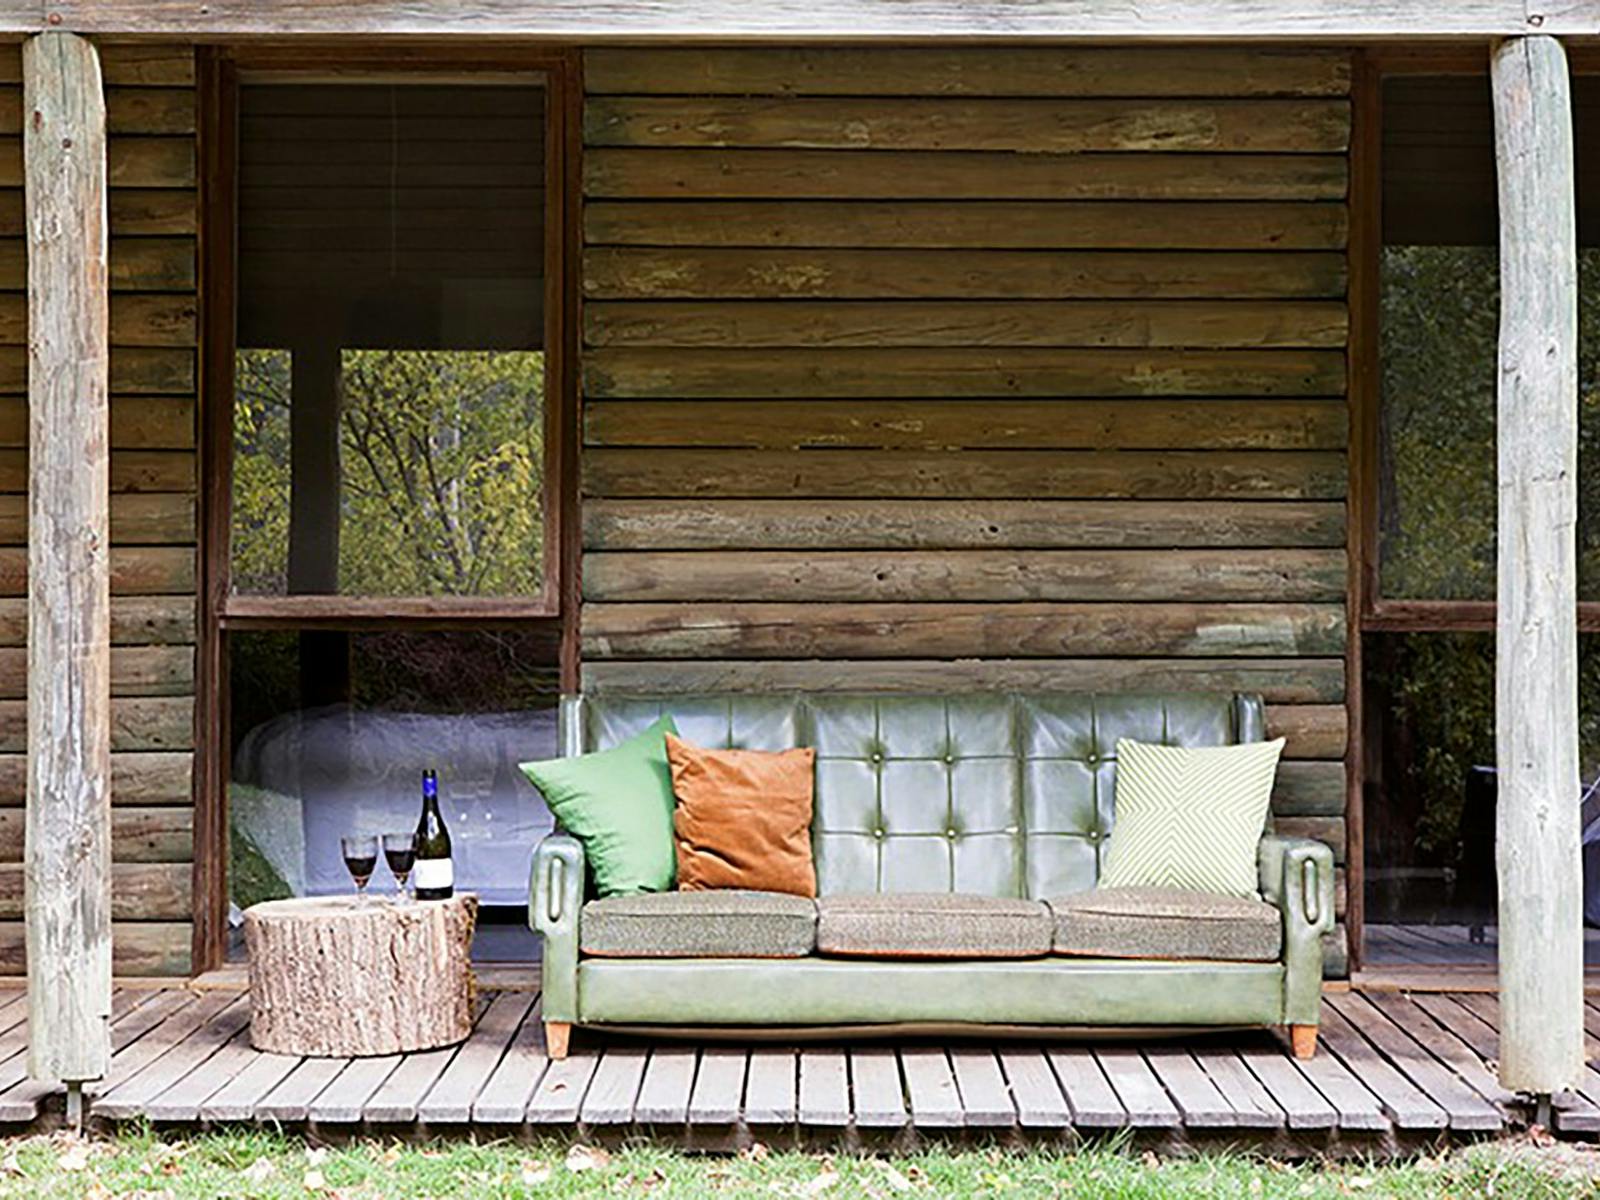 comfy couch on the deck with river view